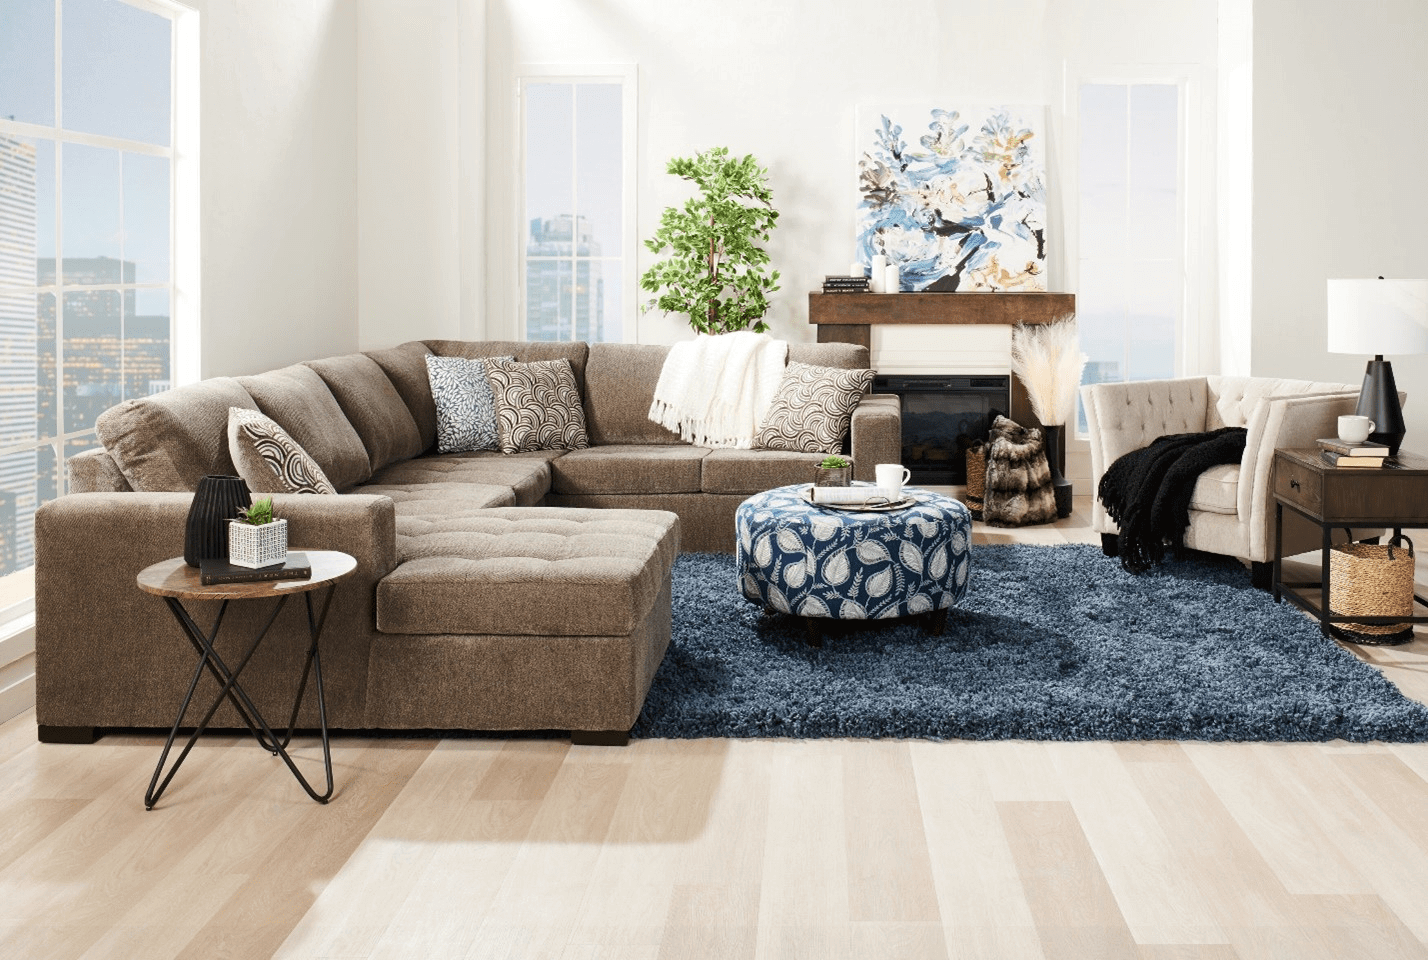 An image of a bright contemporary styled living room. A greyish brown chenille-upholstered sectional stands on a dark blue shag-carpet, paired with a blue accent ottoman. To the right stands a white accent chair with an industrial wooden side table. In front of the sectional is another side table, this one a light brown with modern black metal legs. In the background, a fireplace with a painting on the mantle is visible.